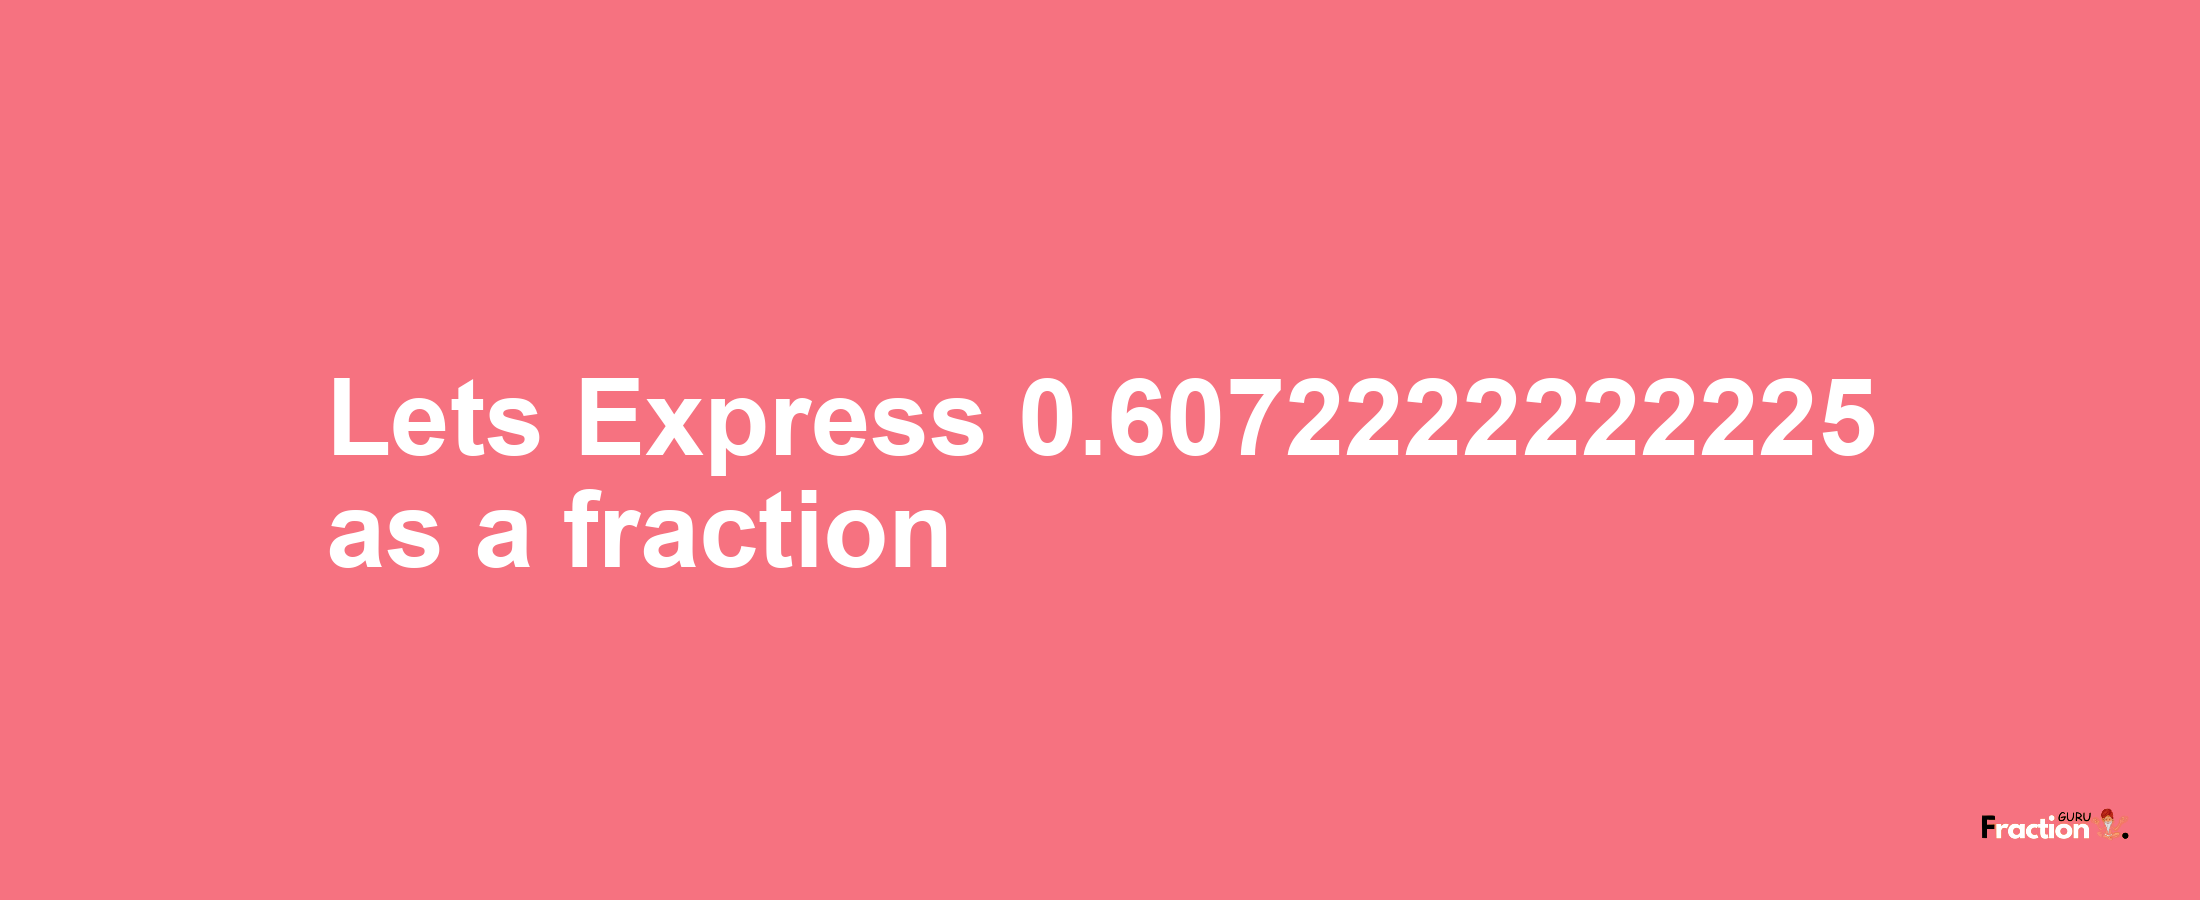 Lets Express 0.6072222222225 as afraction